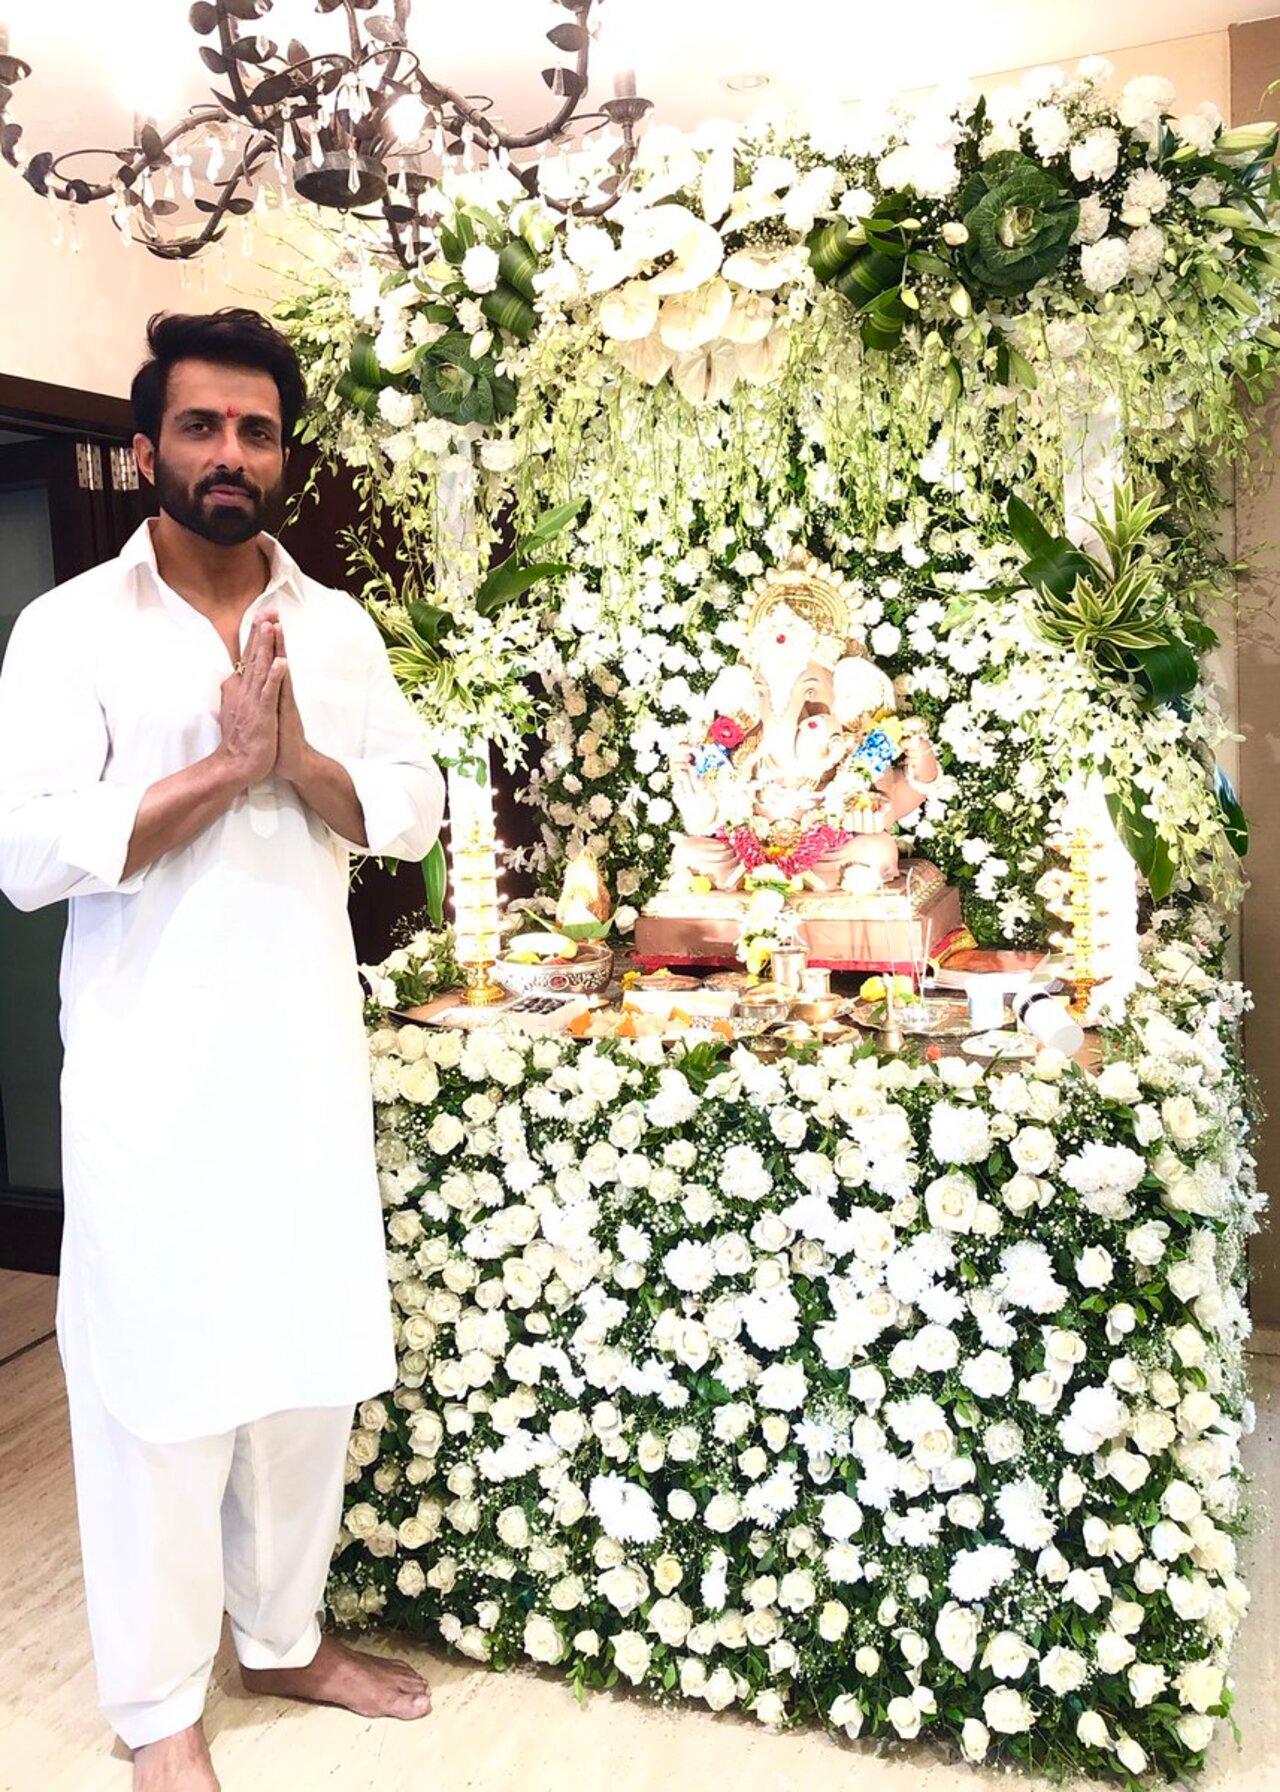 Sonu Sood's Ganpati celebration is a grand annual affair. The actor hosts the Lord of Wisdom with his family at his residence 